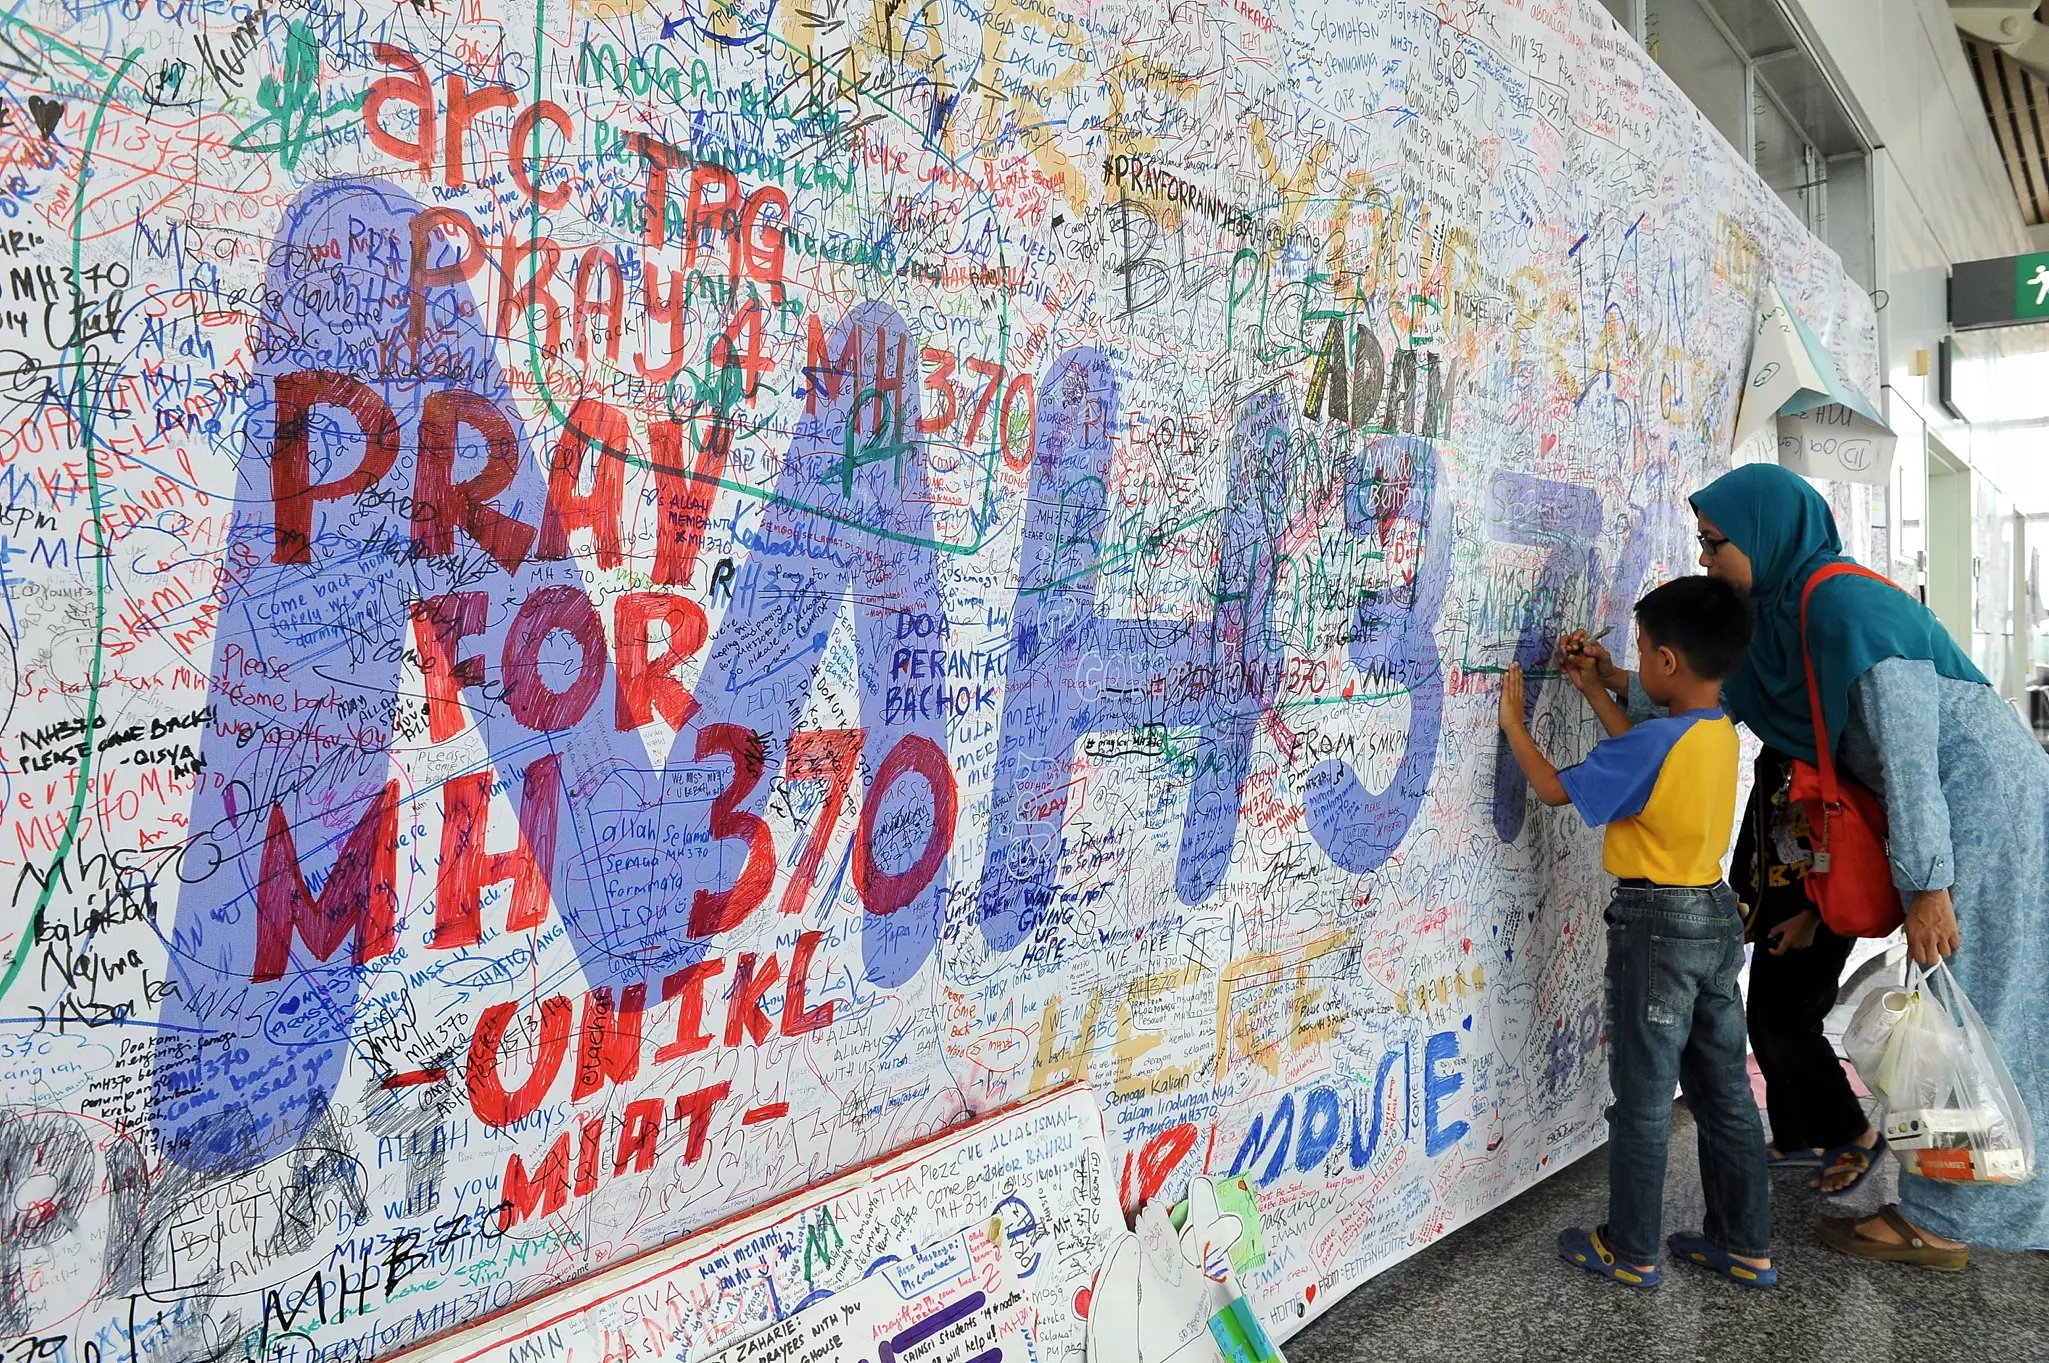 Will we ever know what became of MH370?